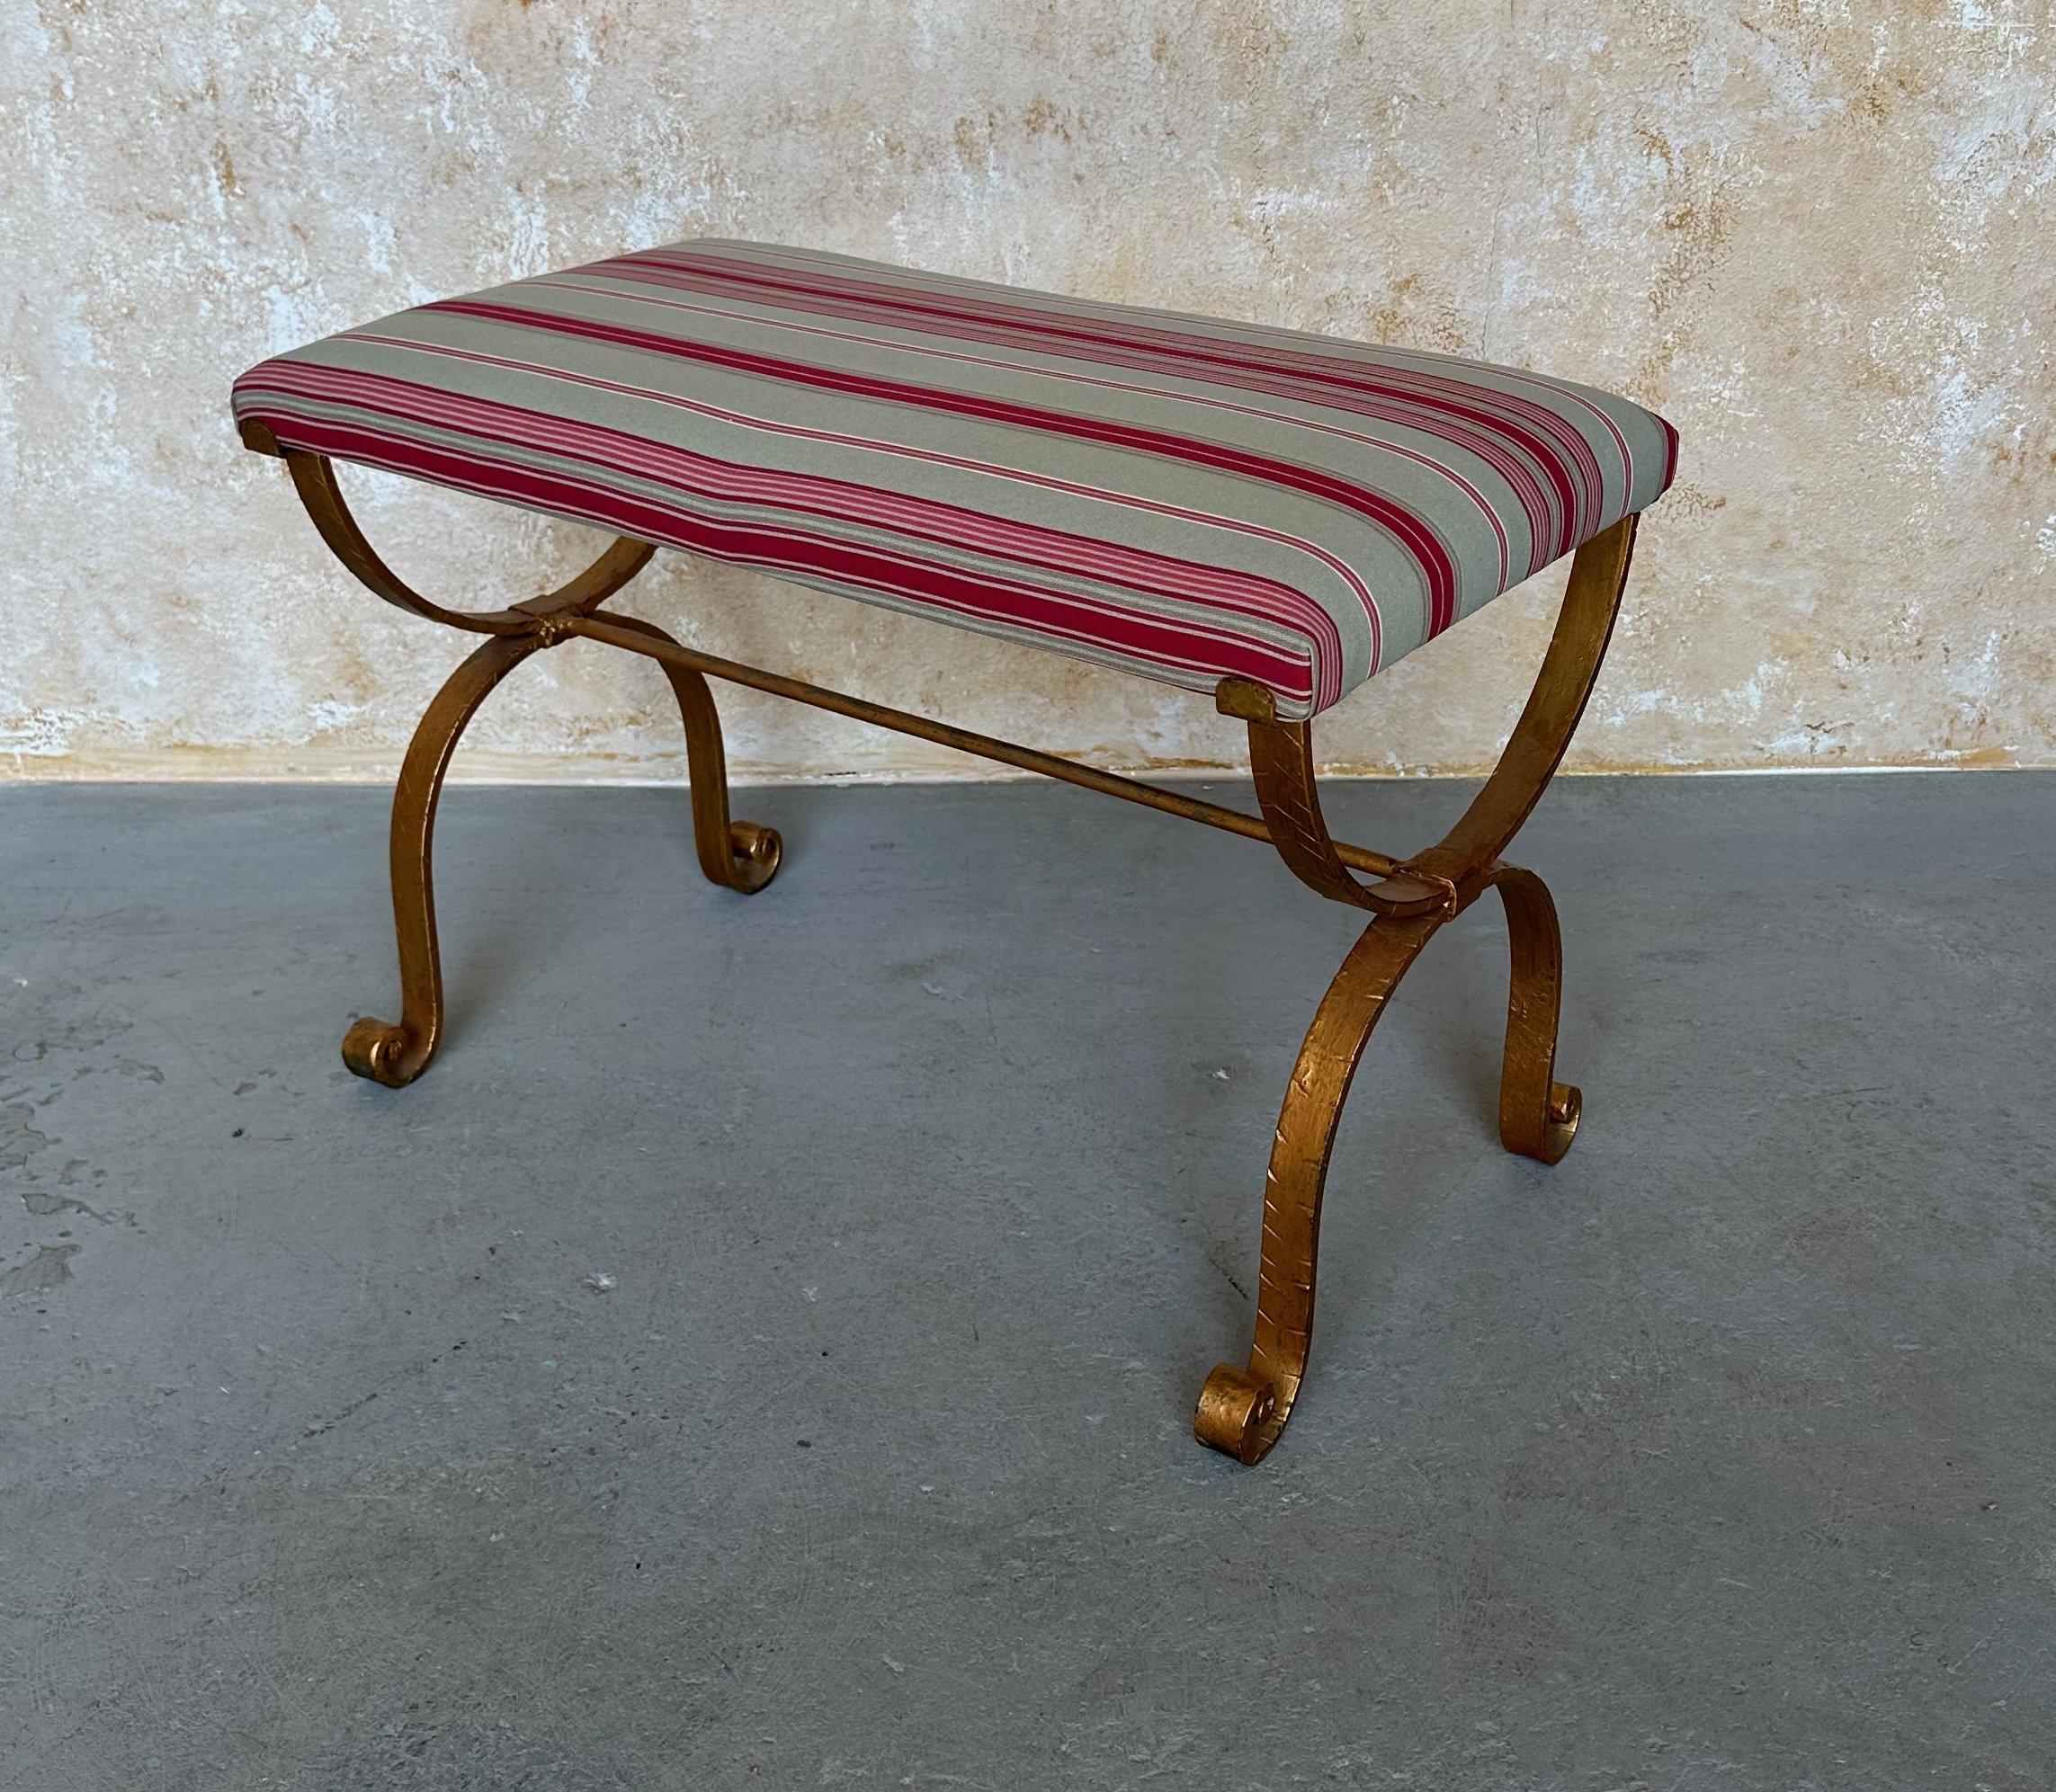 This lovely Spanish gilt iron bench features a hammered hourglass frame with scrolled legs. The seat has been recently reupholstered in fashionable striped red and gray fabric. In very good condition, this piece is sure to be as durable as it is